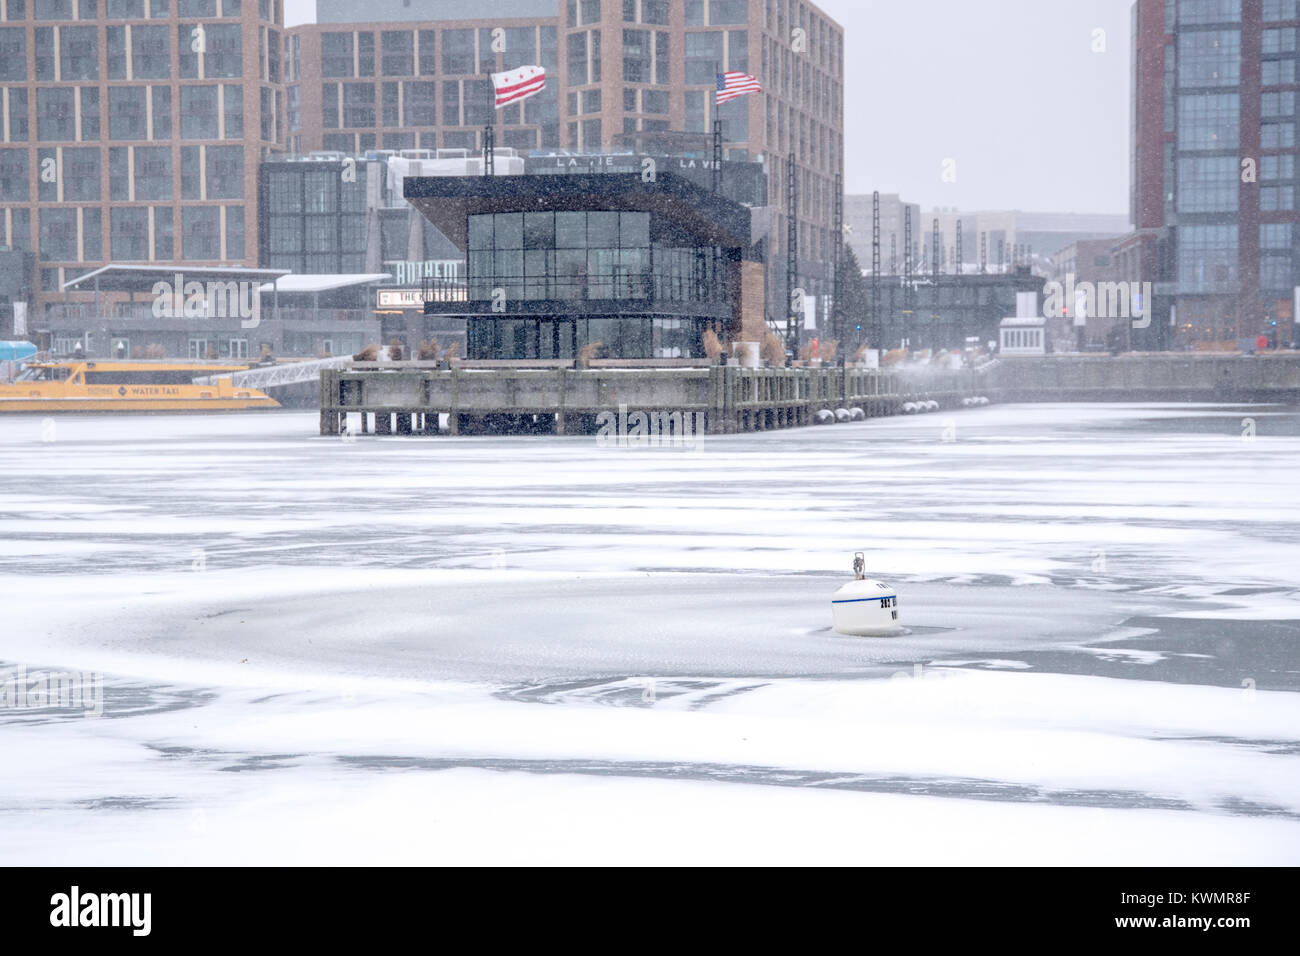 Washington, USA. 04th Jan, 2017. The Wharf Dockmaster Building on the  Southwest Waterfront in Washington DC stands on a pier surrounded by the  ice-filled Potomac River. Freezing temperatures and high winds have